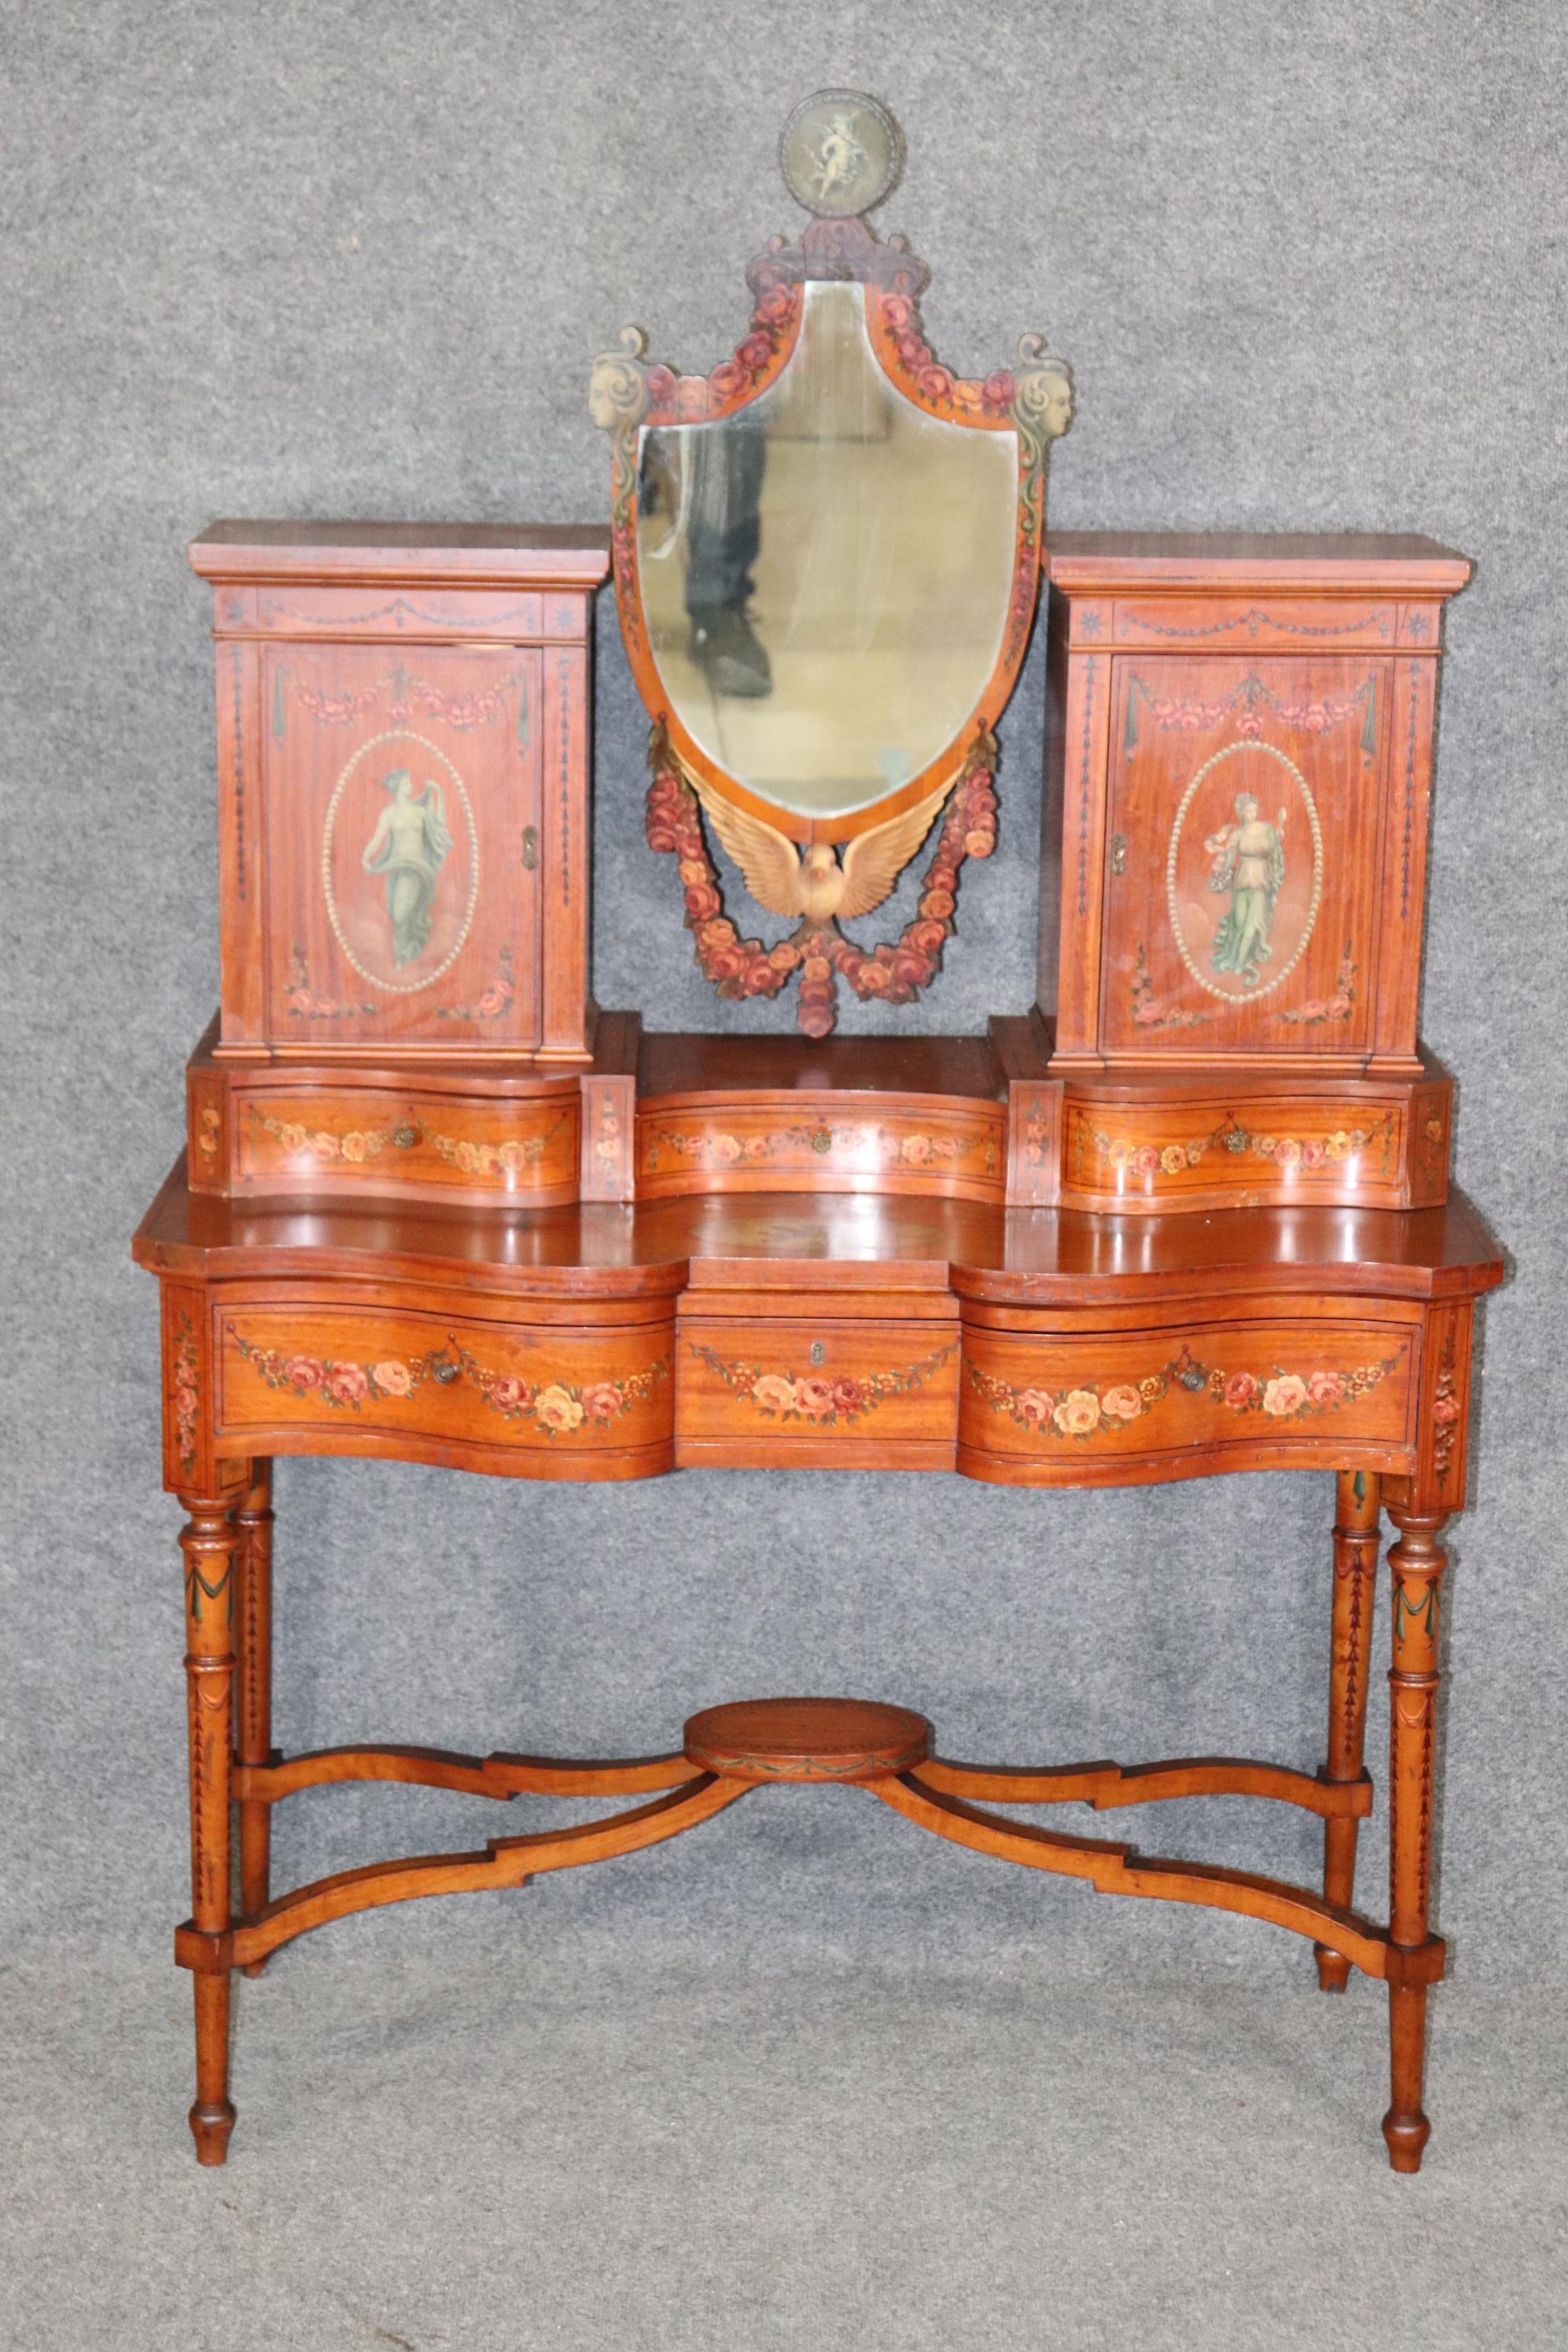 Late 19th Century Fine Quality Gillow & Co Satinwood Paint Decorated Ladies Vanity Circa 1890s For Sale